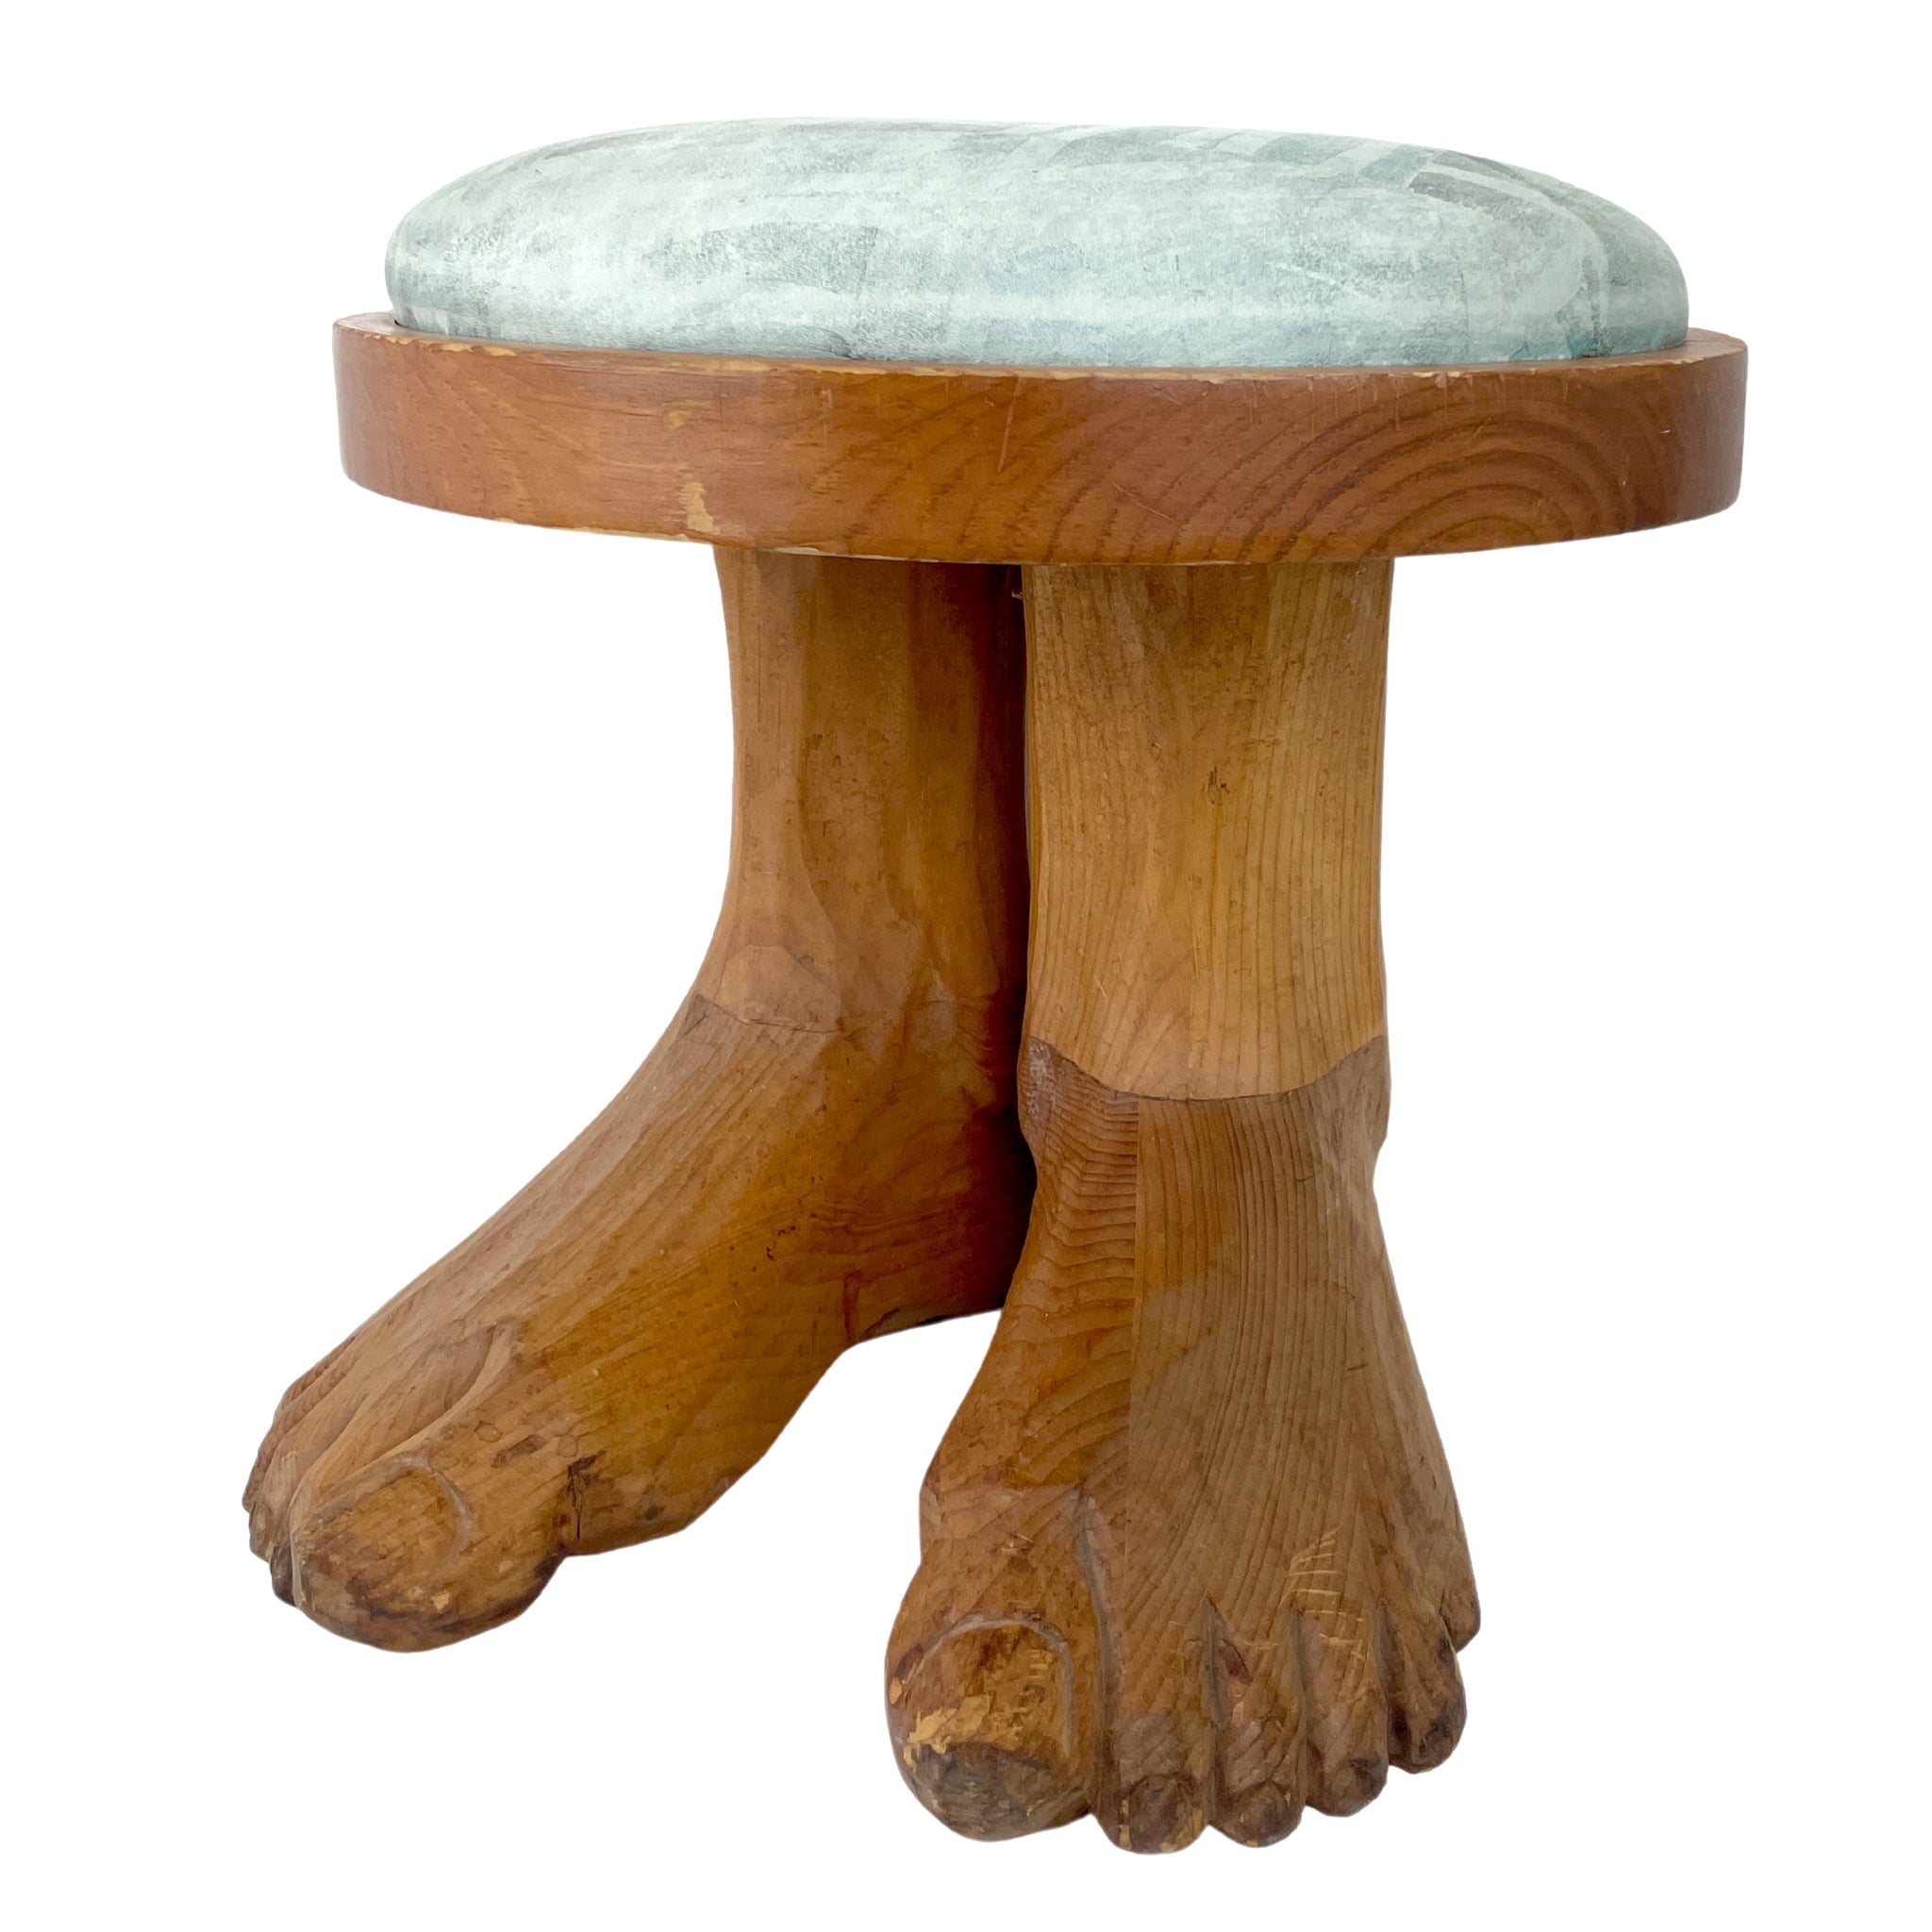 [Ringo Star] Carved Wooden Footstool - FROM THE COLLECTION OF RINGO STARR, ca. 1970